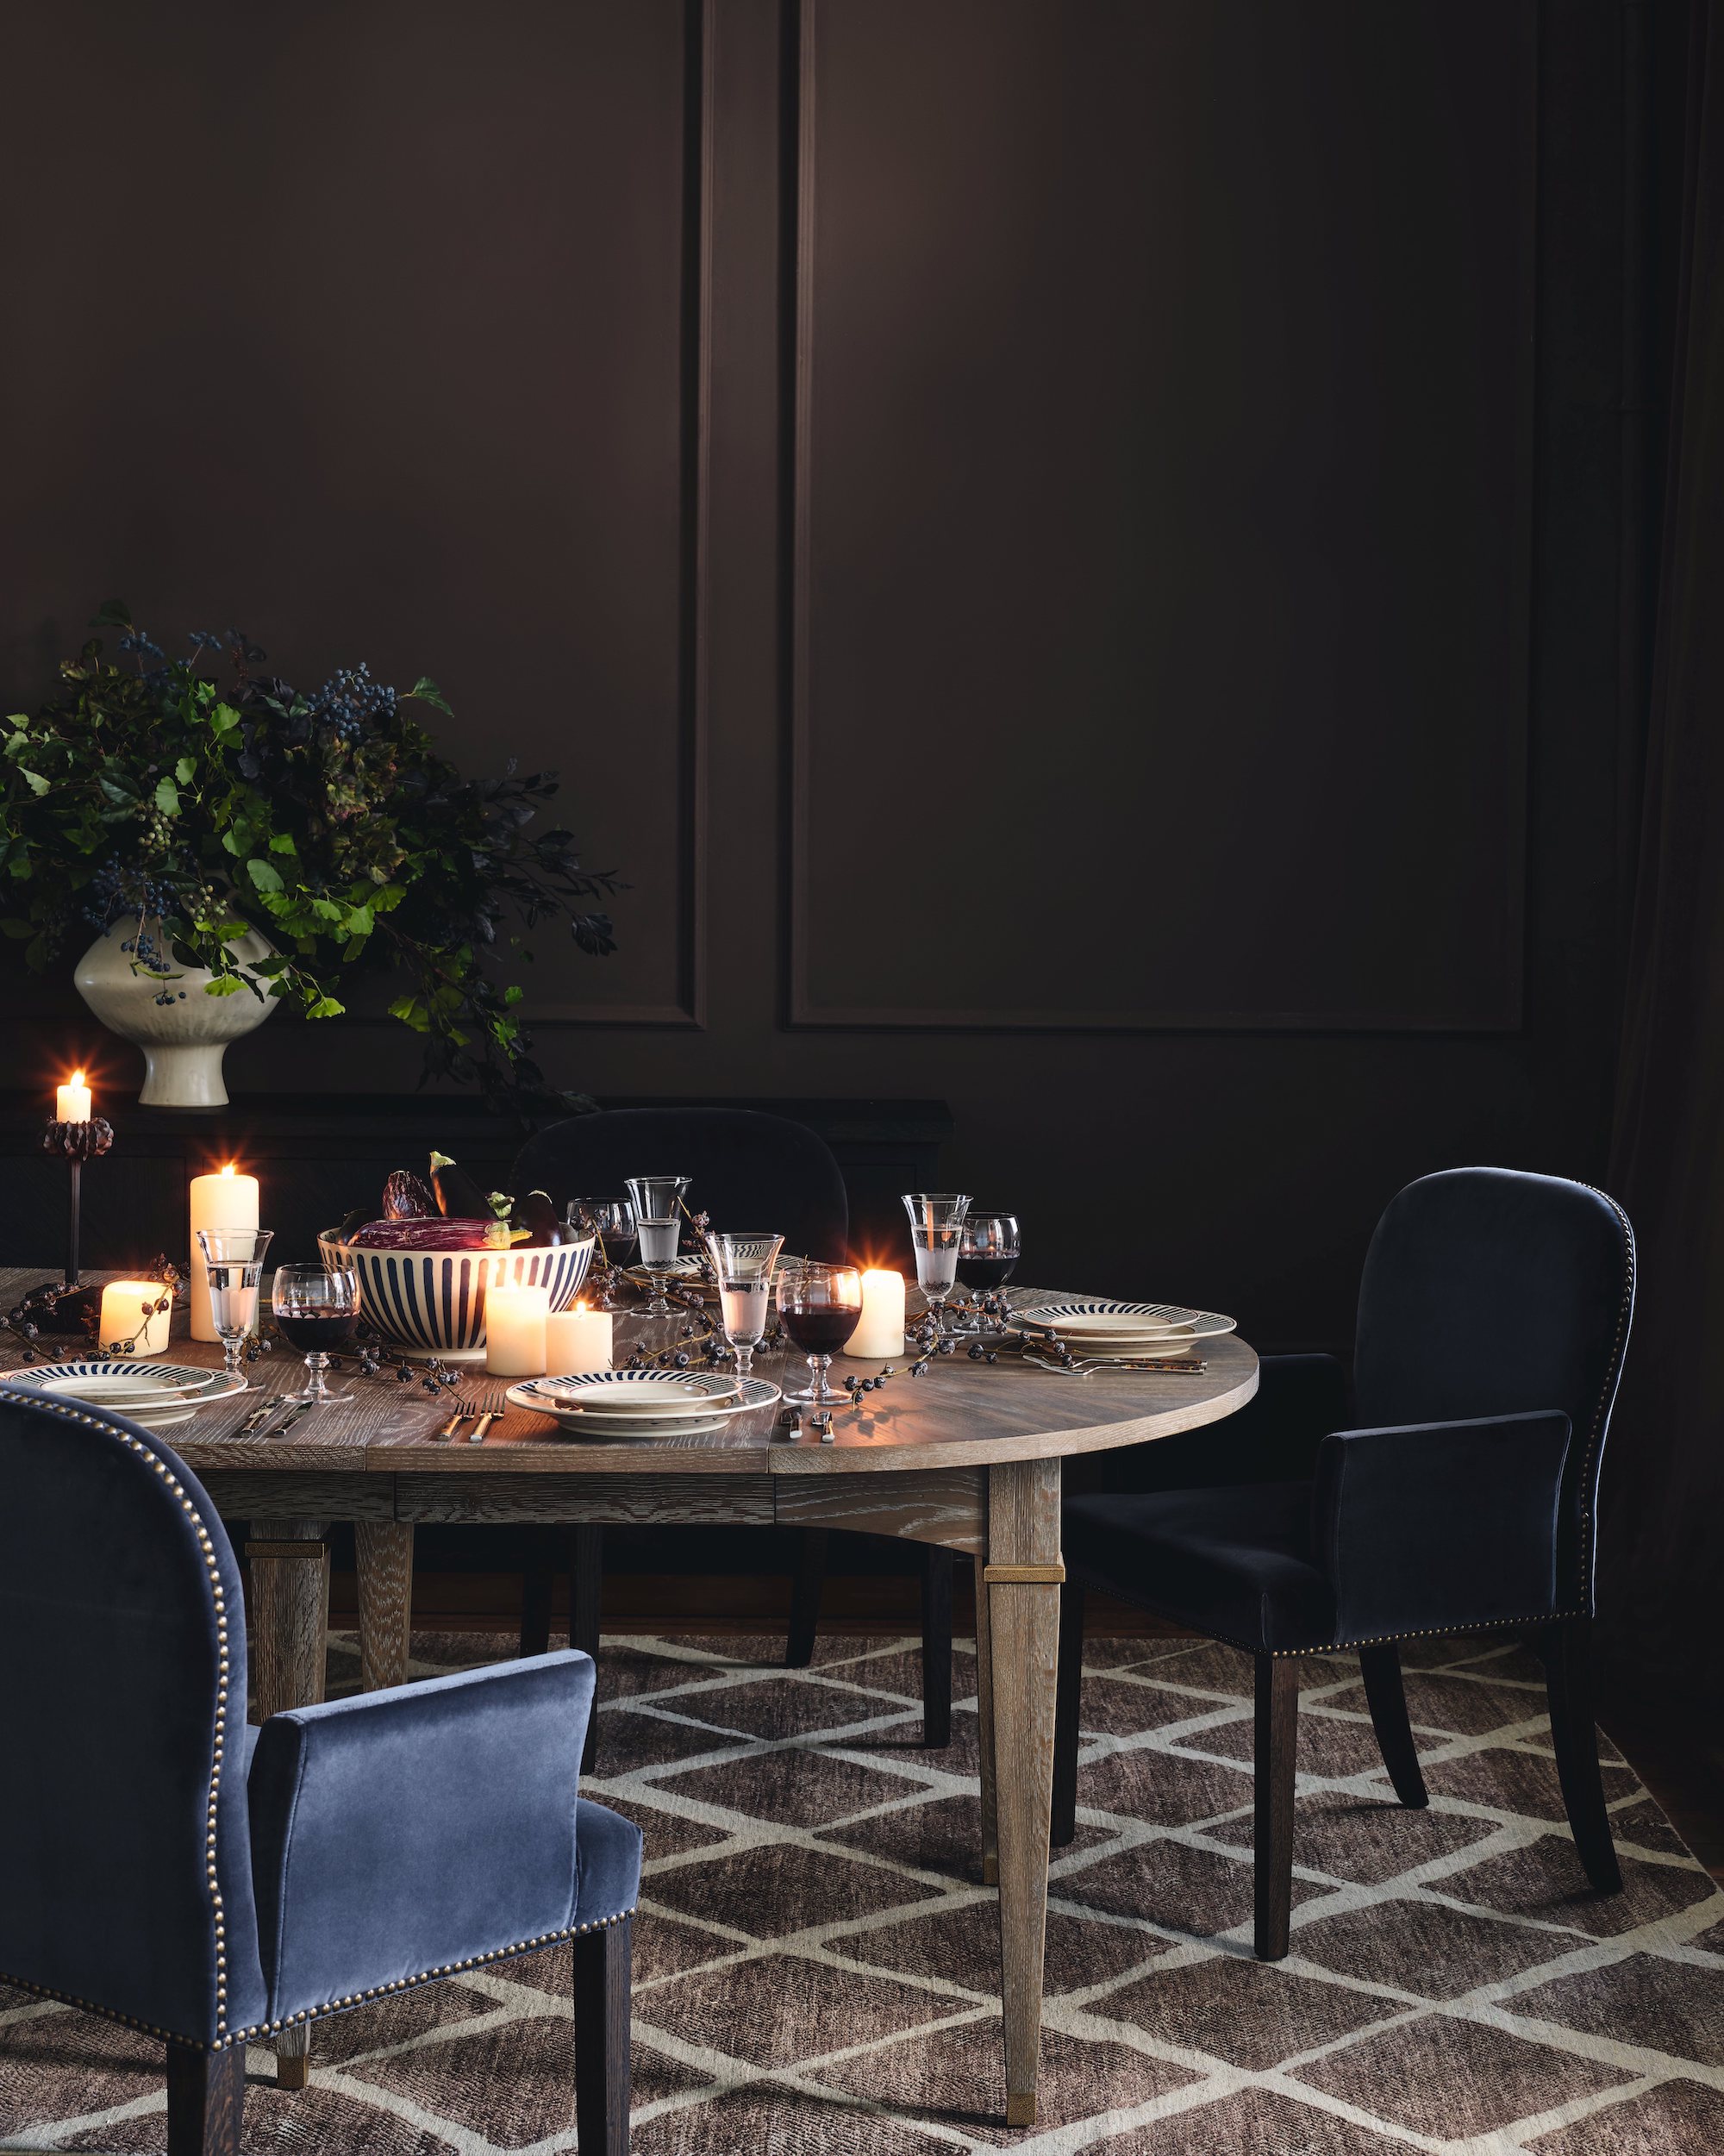 dining room with dark chocolate walls, navy chairs, fall style table decor, black and white plates, candles, vase of flowers and berries